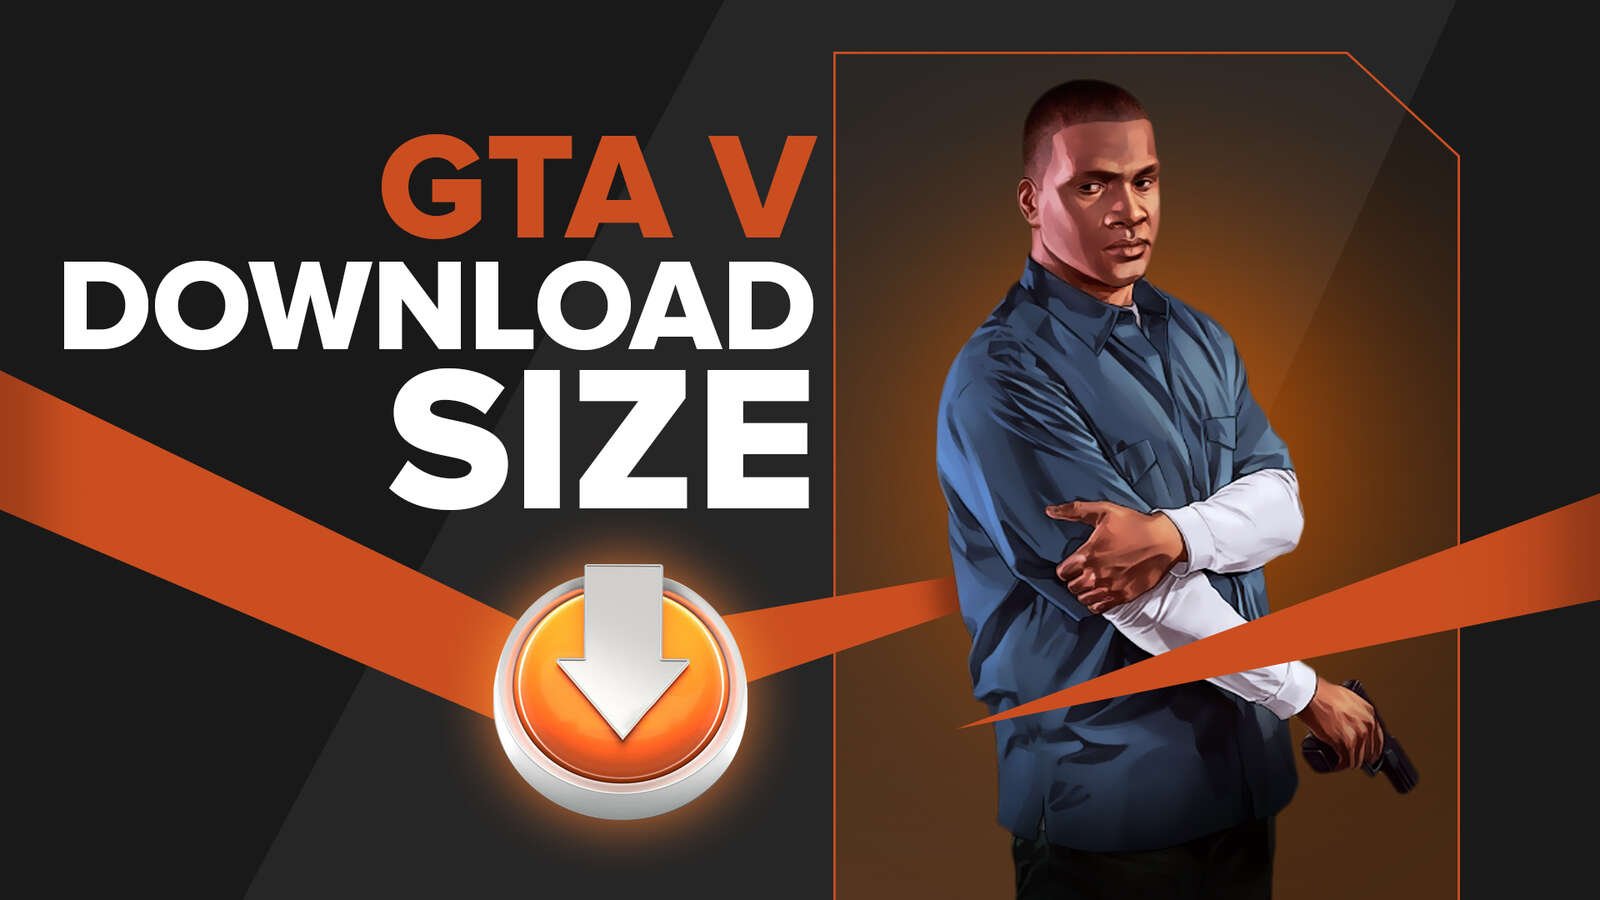 Check Out The Latest GTA V Download Size [All Platforms]